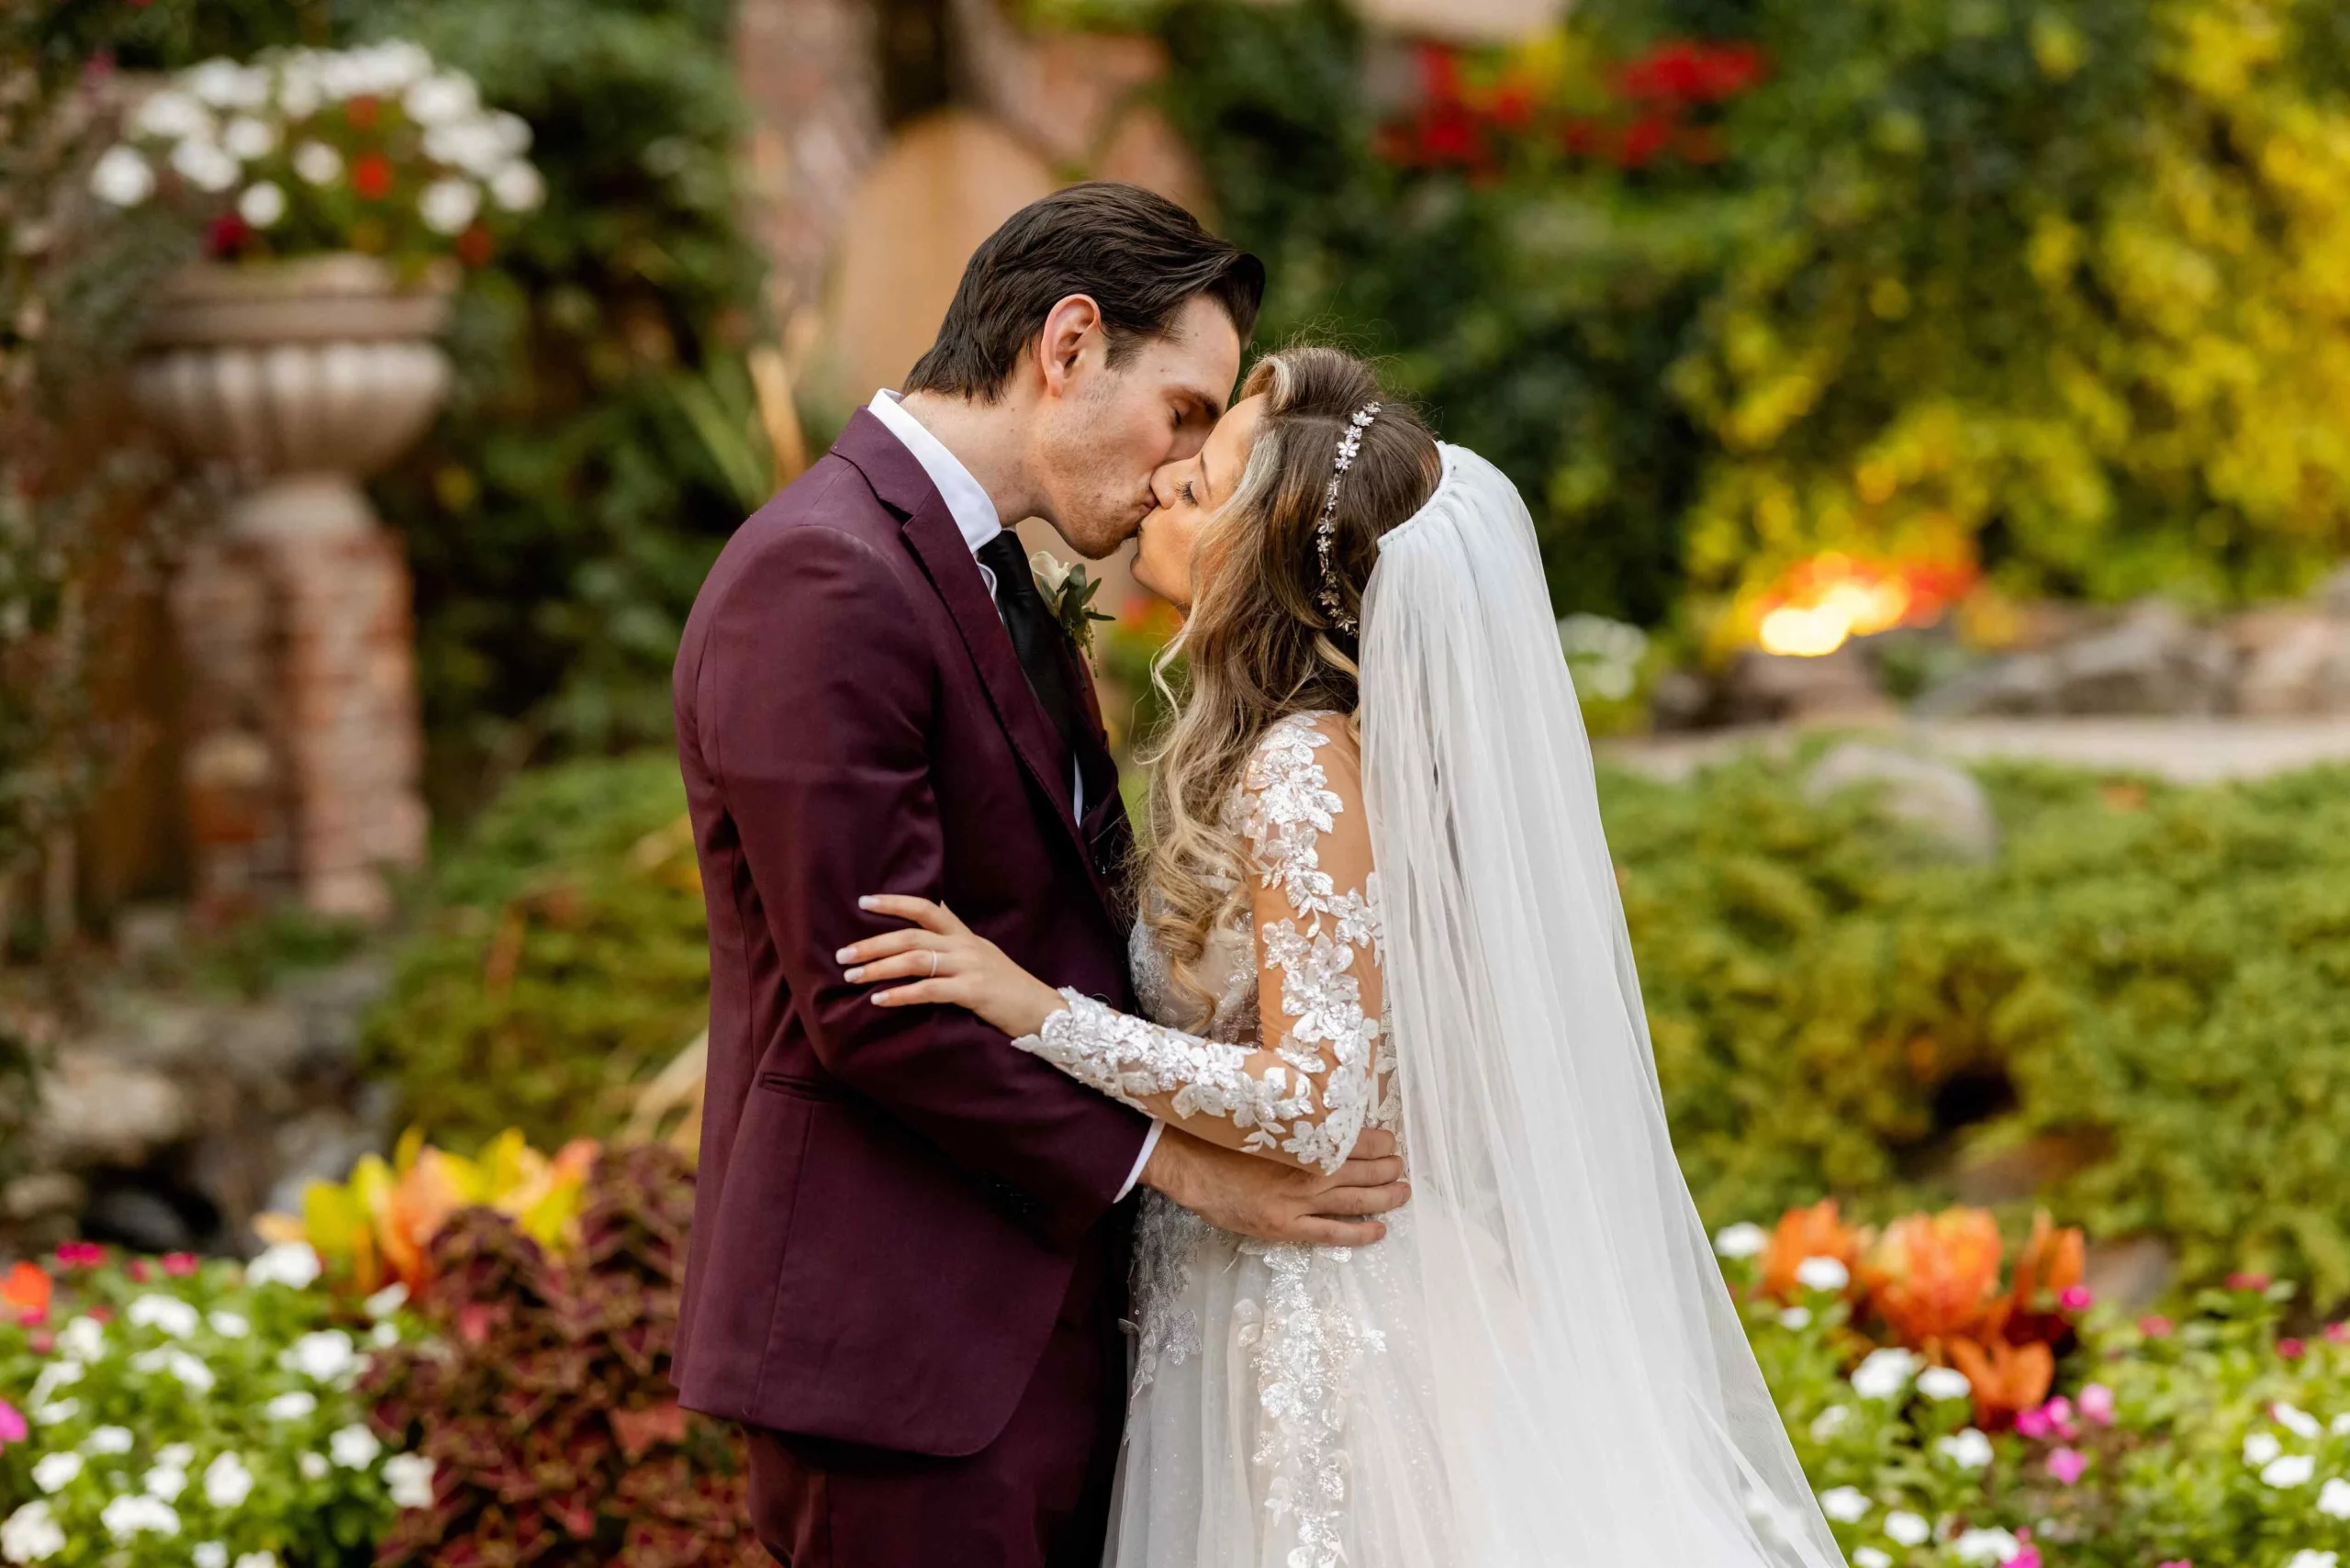 Bride and groom sharing a kiss in the garden surrounded by fall foliage on their wedding day